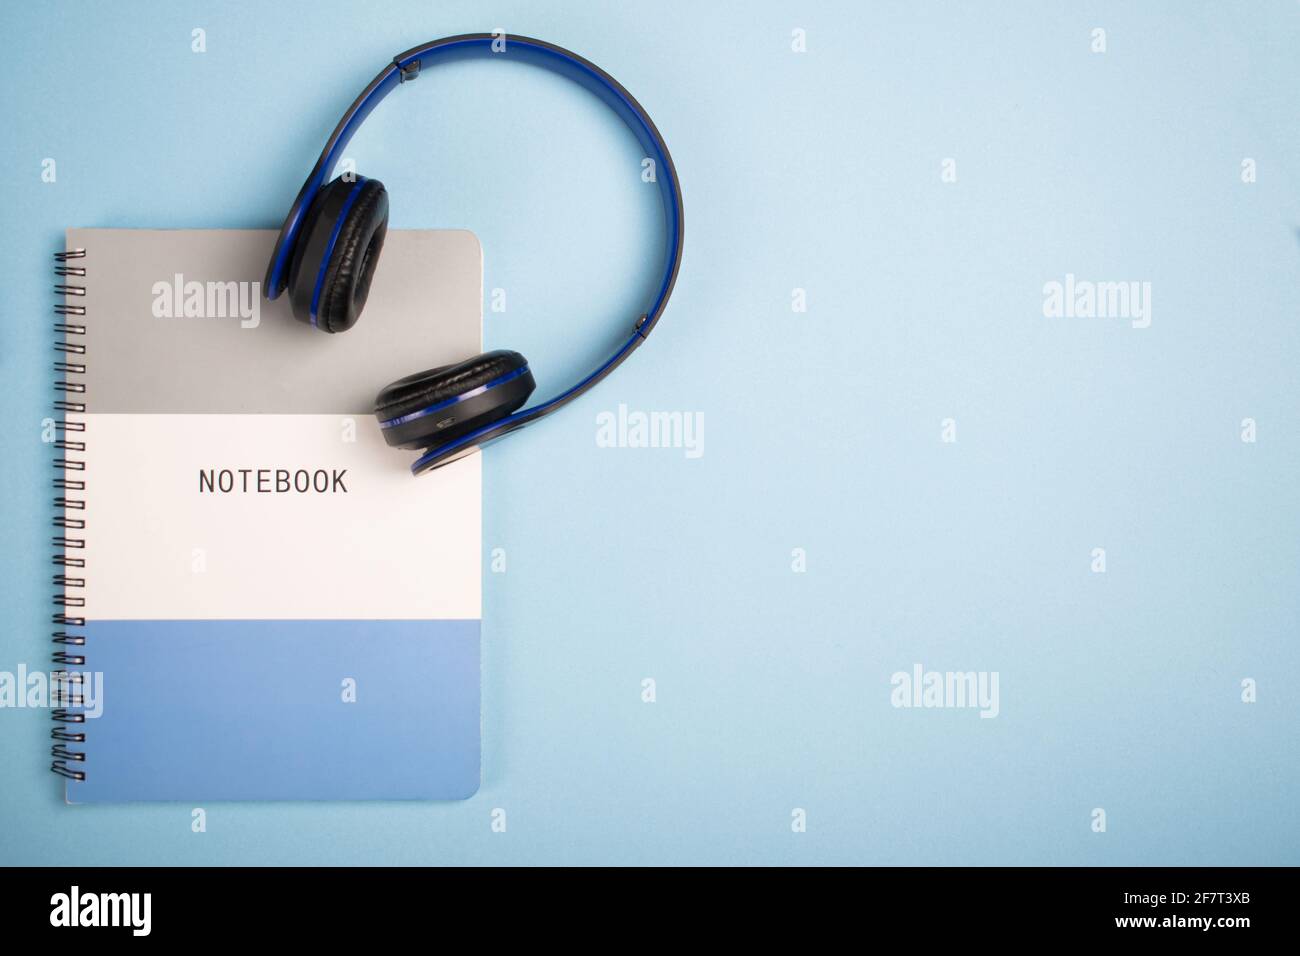 Notebook and headphones on a blue surface - copy space Stock Photo